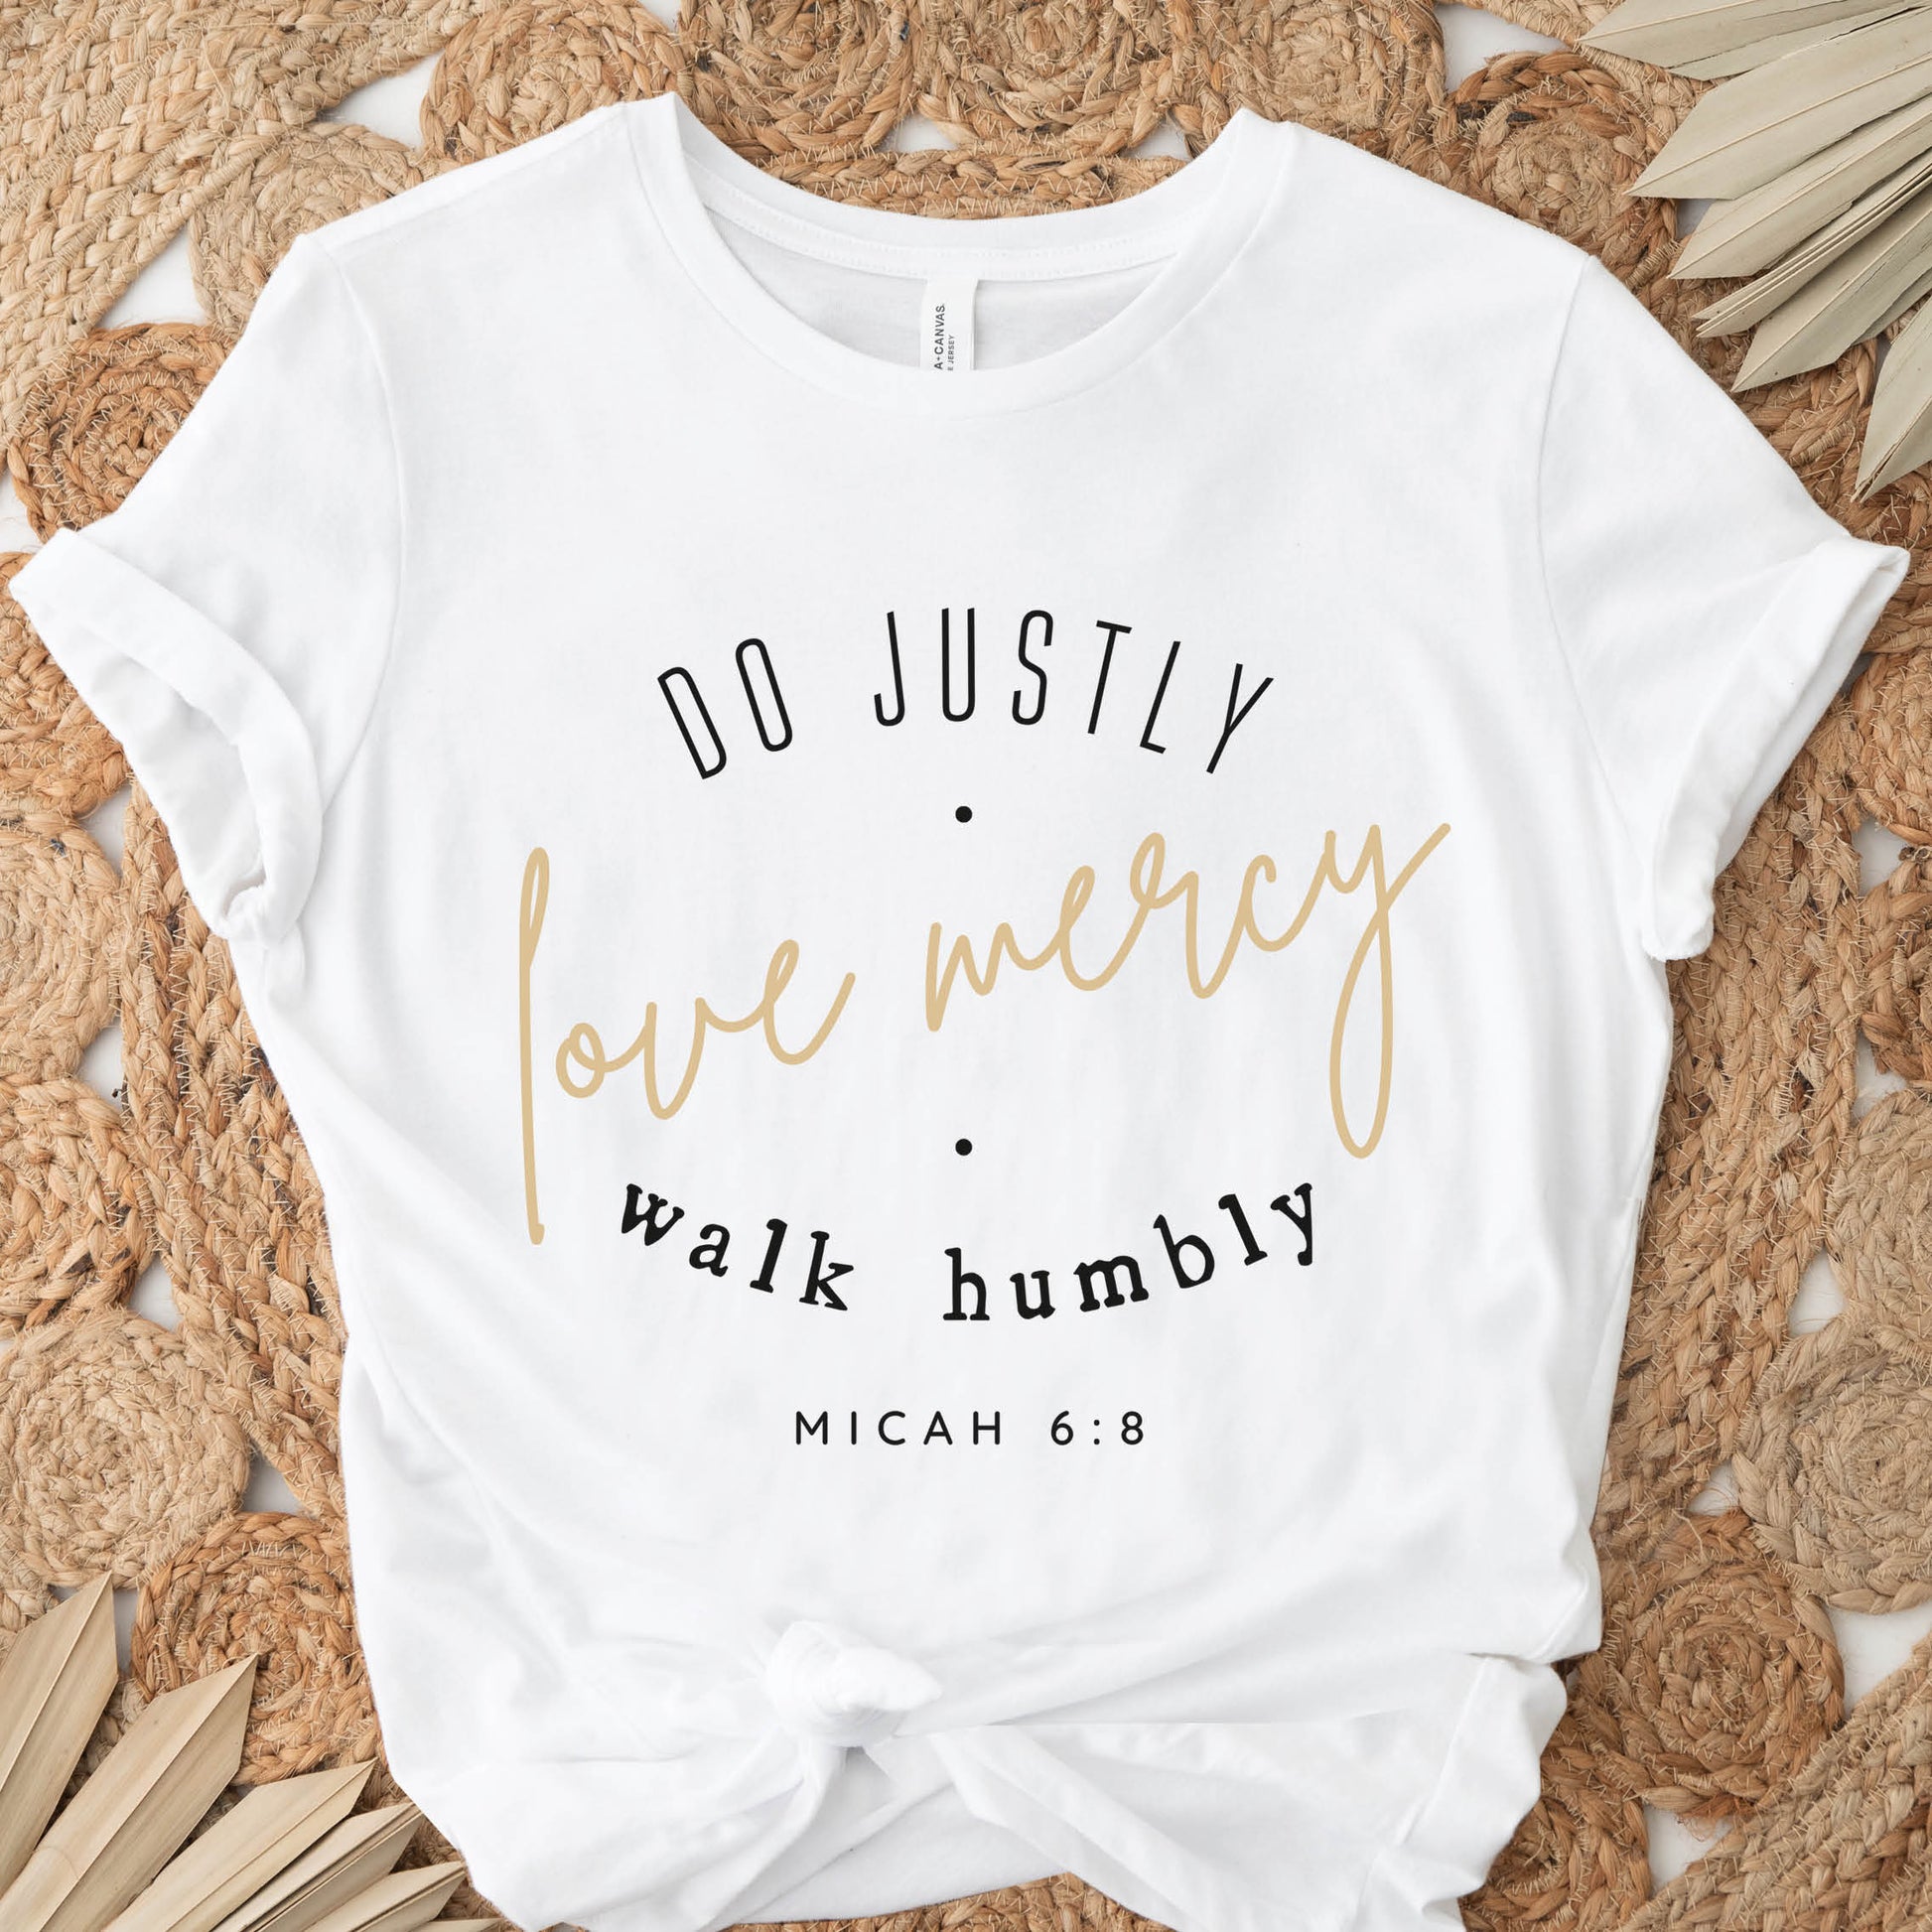 White Christian aesthetic faith-based unisex t-shirt for women with Micah 6:8 bible verse scripture printed that says, Do Justly Love Mercy walk humbly, in gold and black, unique gift for her